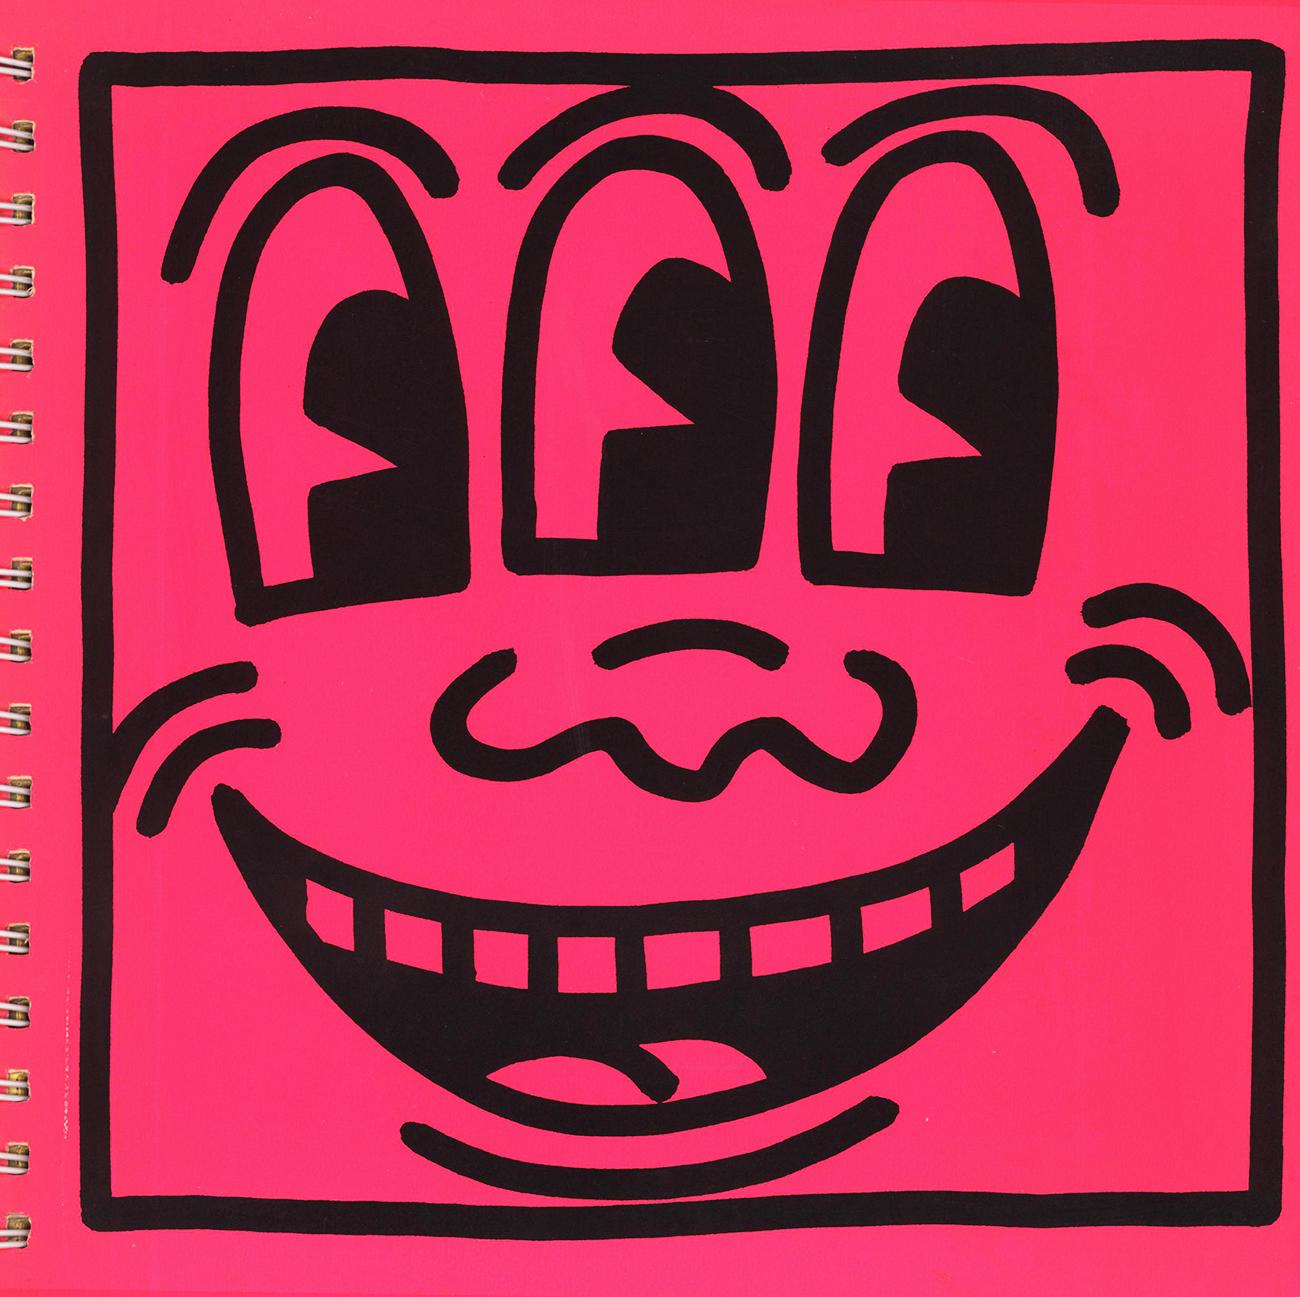 Keith Haring 1982 1st edition (Keith Haring Tony Shafrazi Gallery):
The much seminal & highly collectible, limited edition catalog featuring the iconic neon Haring Three Eyed Smiling Face cover & 15 sought-after double-sided lithographic inserts